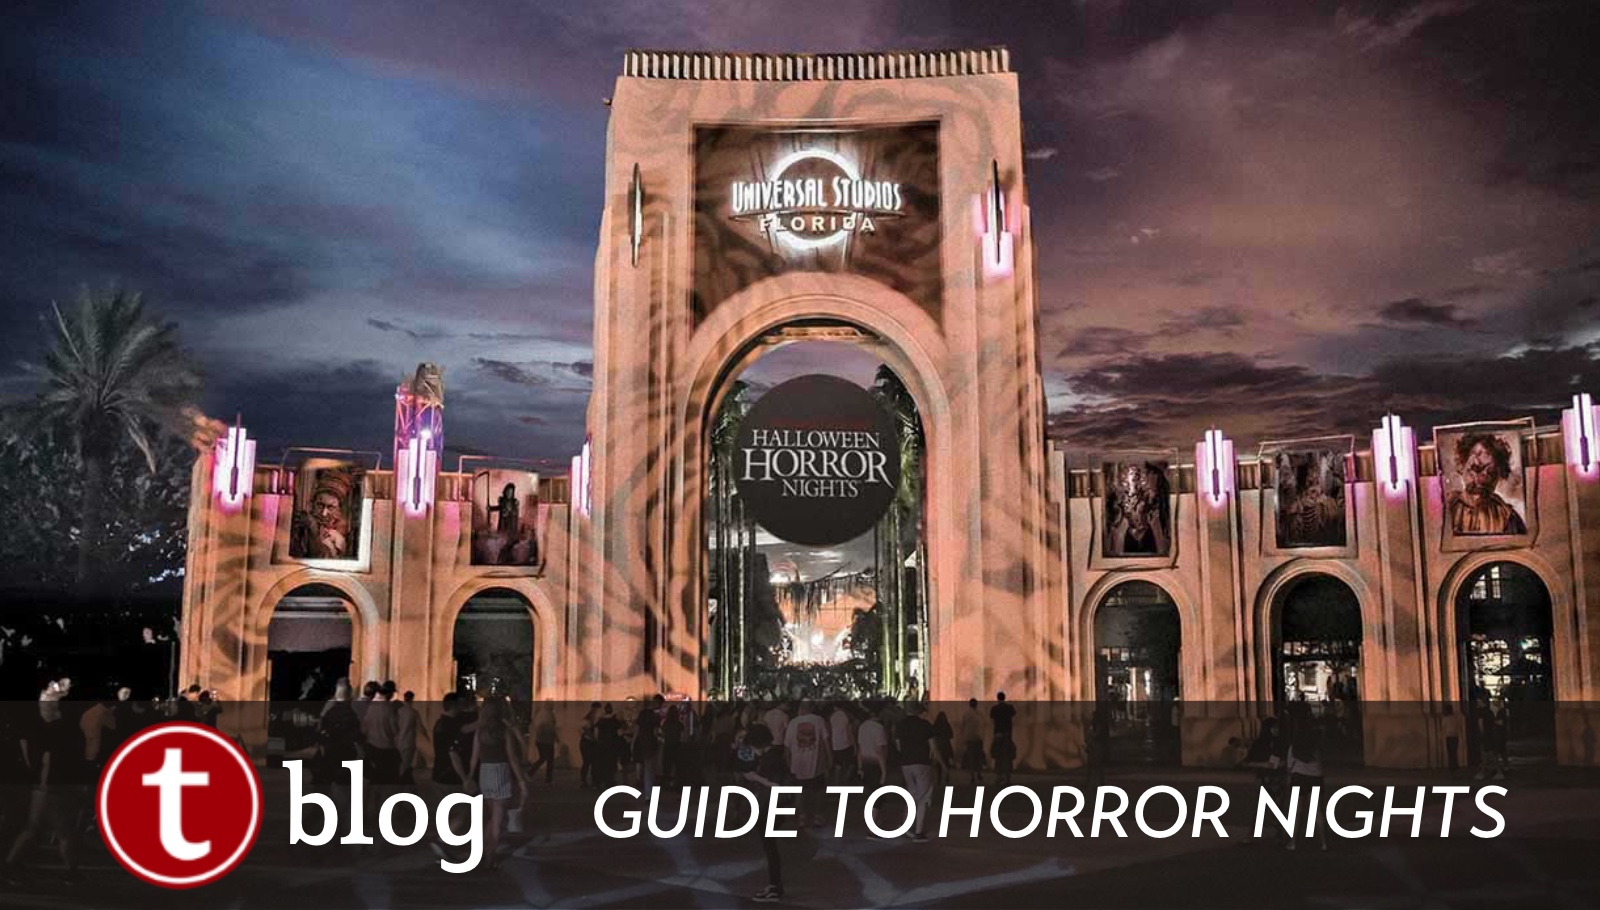 Stranger things: 'Stranger Things' returns to Universal Studios for  Halloween Horror Nights — Location, dates & more - The Economic Times